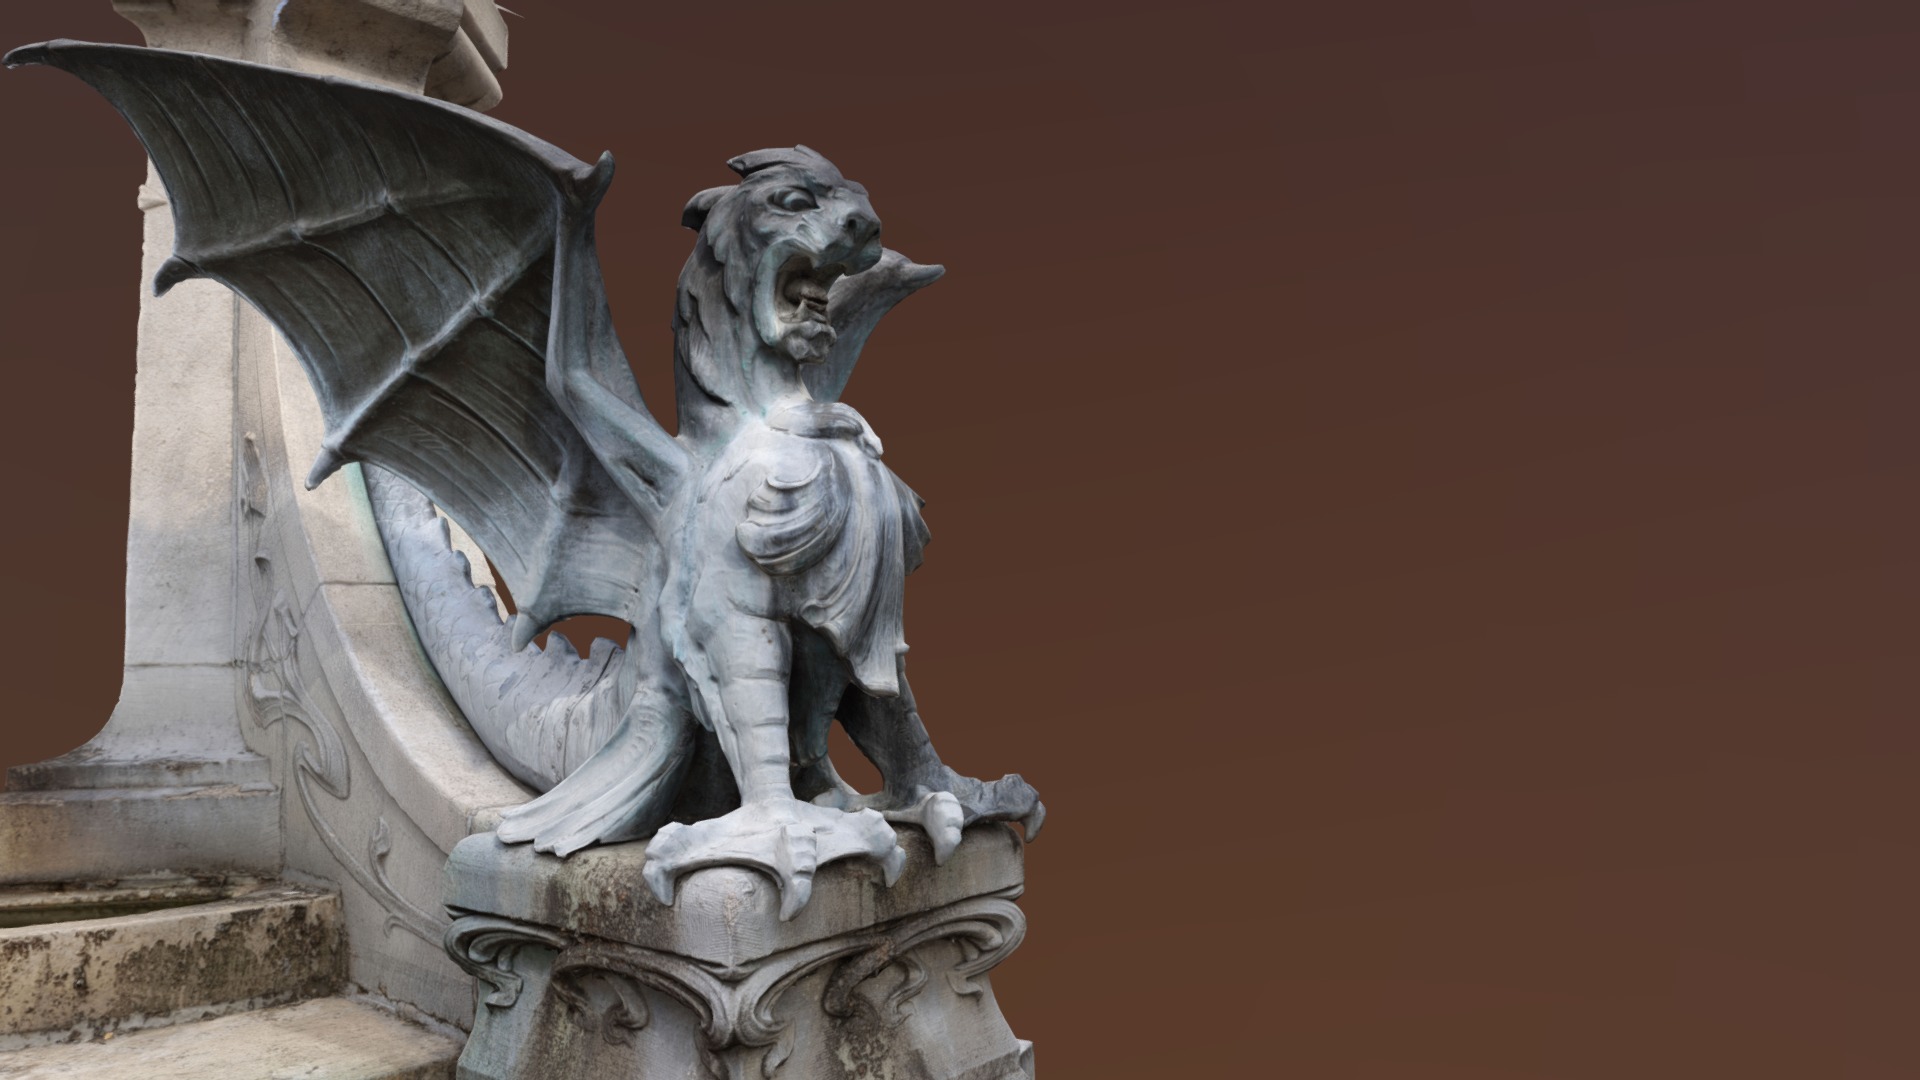 3D model Dragon at Drakenfontein, ‘s Hertogenbosch - This is a 3D model of the Dragon at Drakenfontein, 's Hertogenbosch. The 3D model is about a statue of a person and a dog.